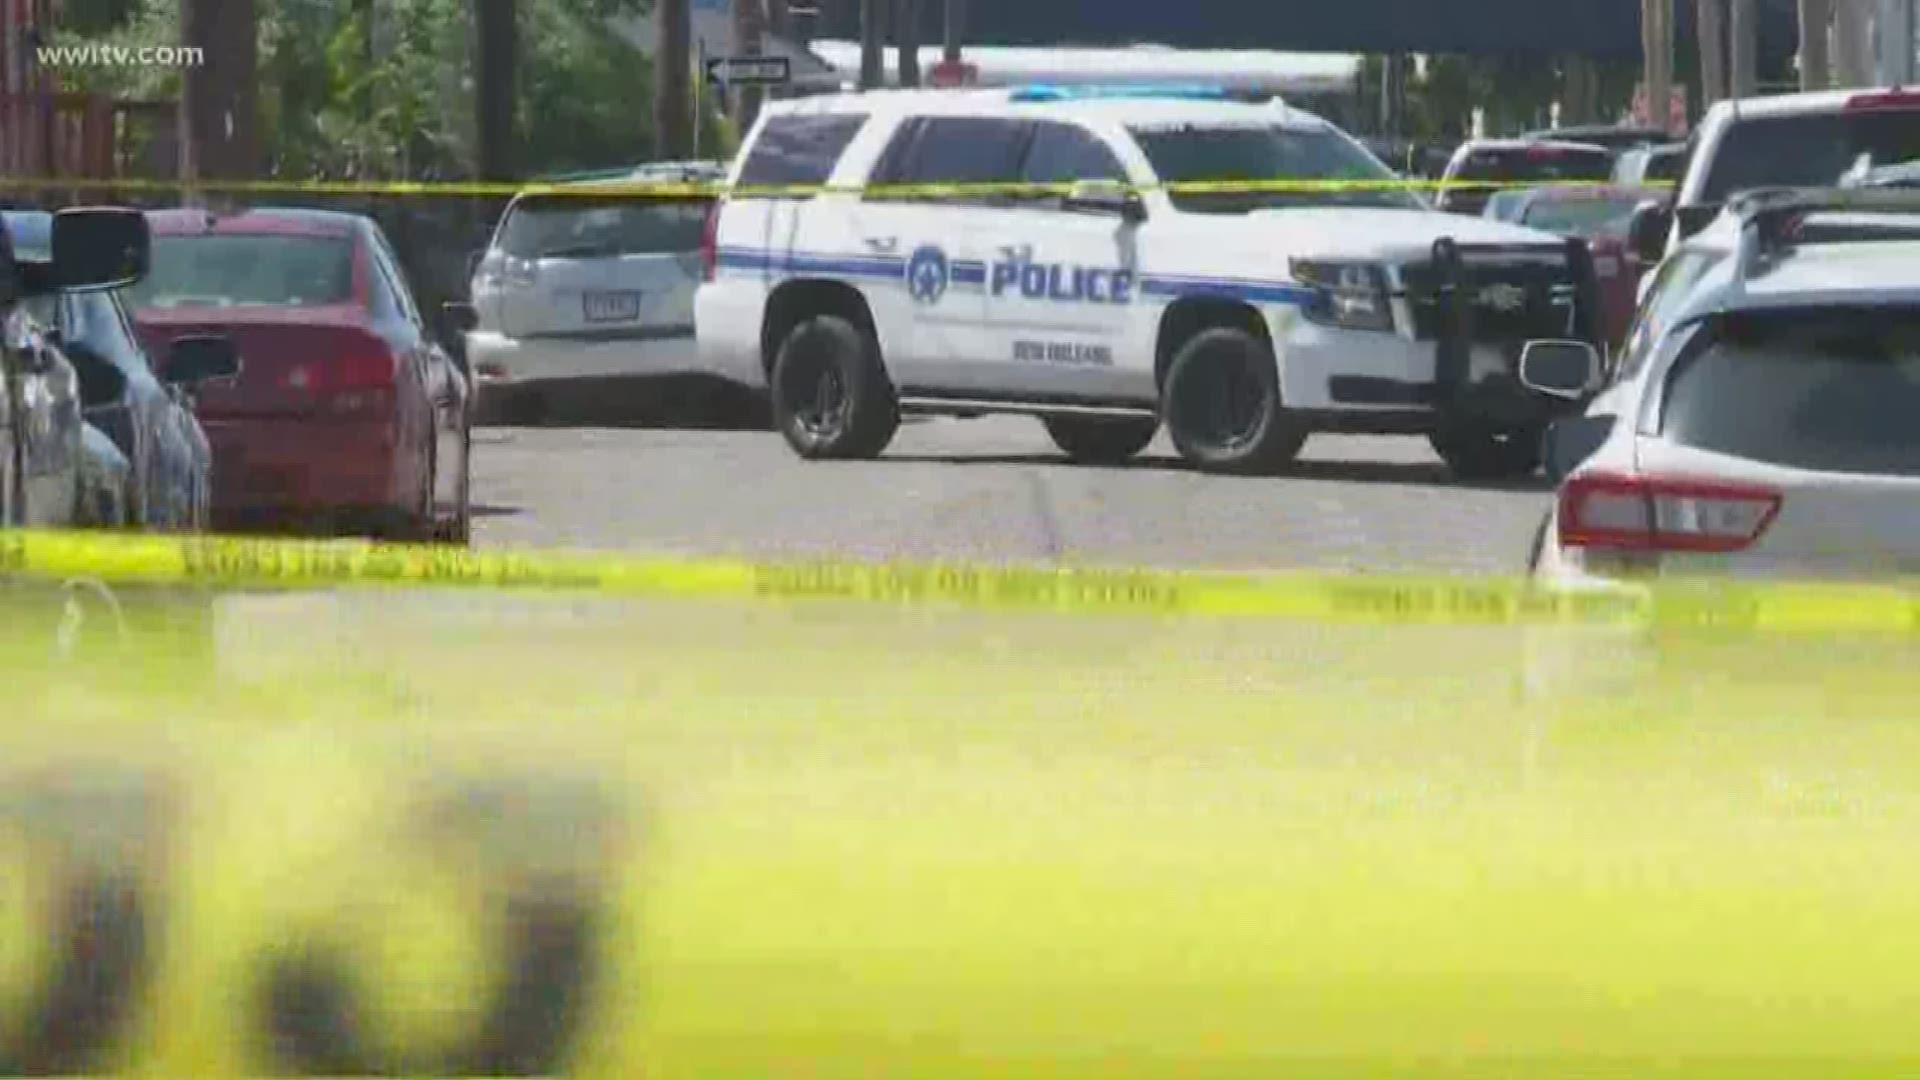 NOPD is investigating the quadruple shooting